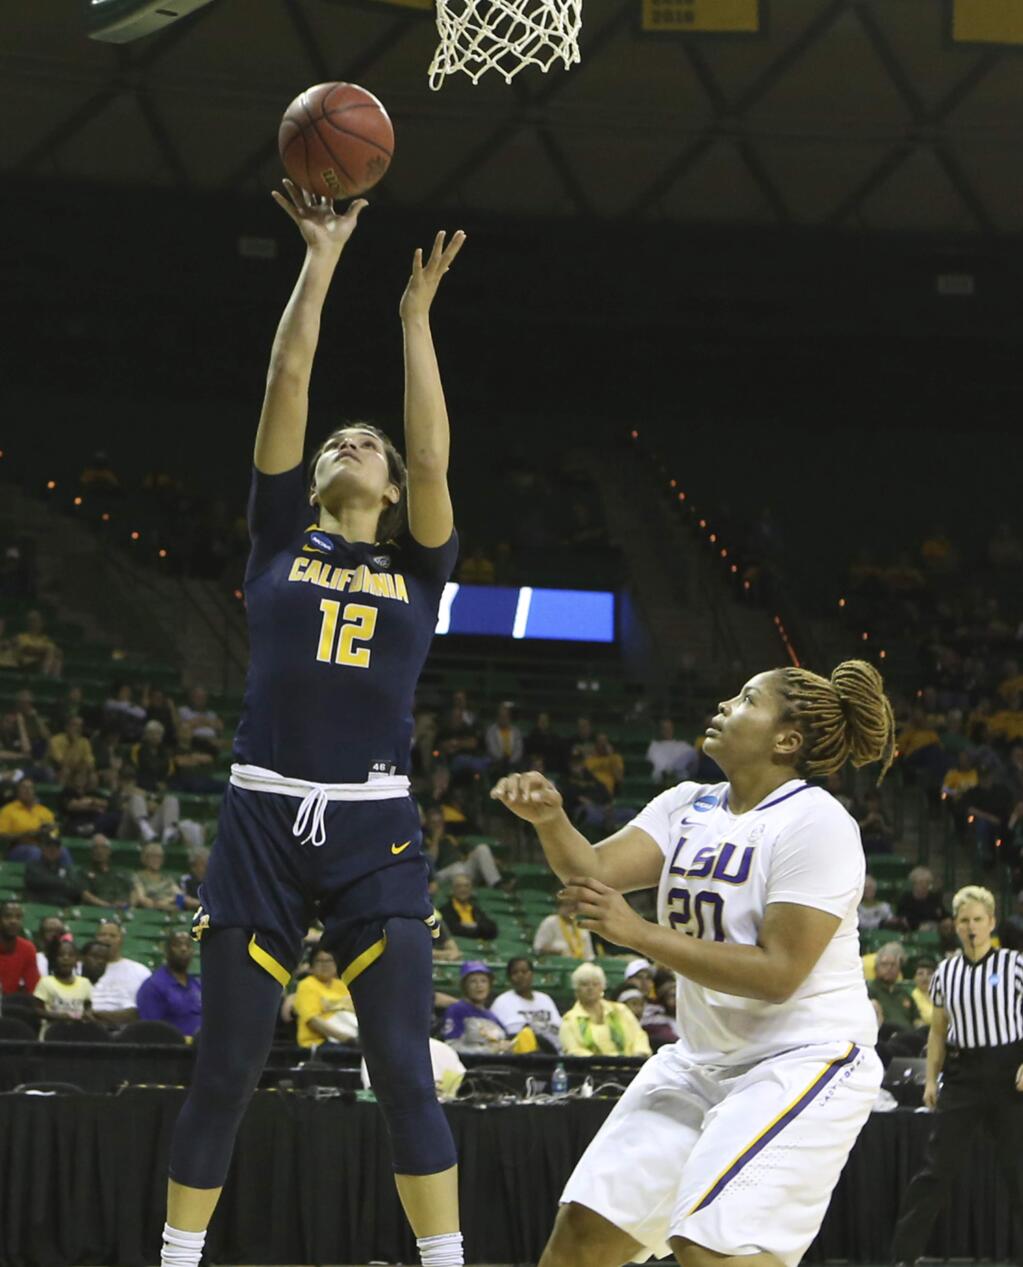 California forward Penina Davidson (12) scores past LSU forward Alexis Hyder (20) in the first half of a first-round game in the women's NCAA college basketball tournament, Saturday, March, 18, 2017, in Waco, Texas. (AP Photo/Jerry Larson)/ AP)